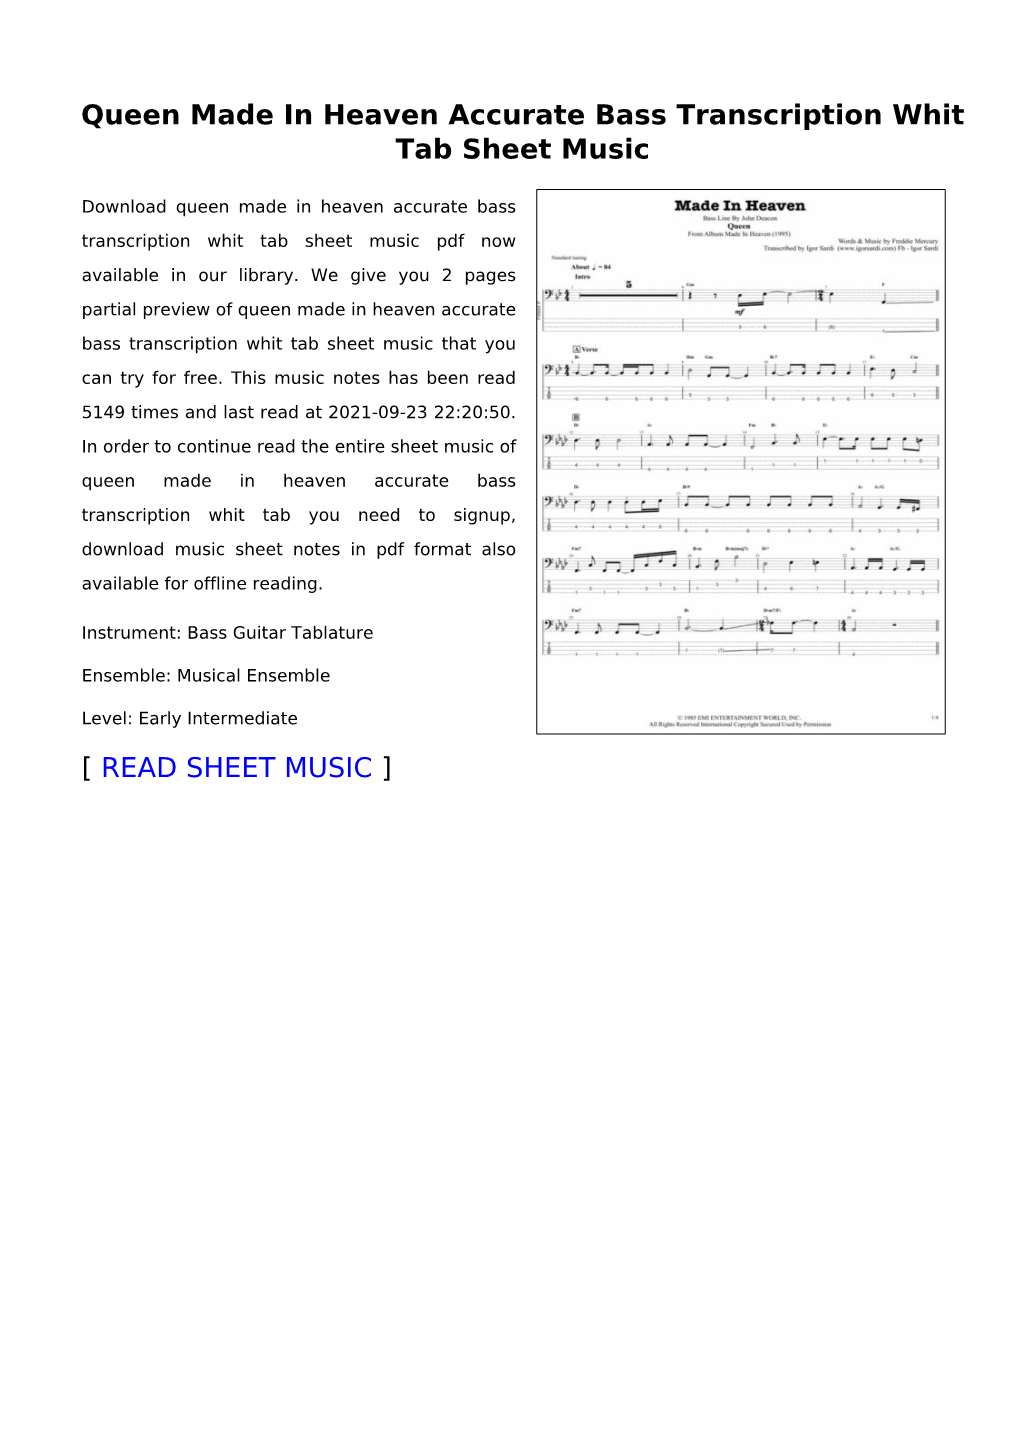 Queen Made in Heaven Accurate Bass Transcription Whit Tab Sheet Music